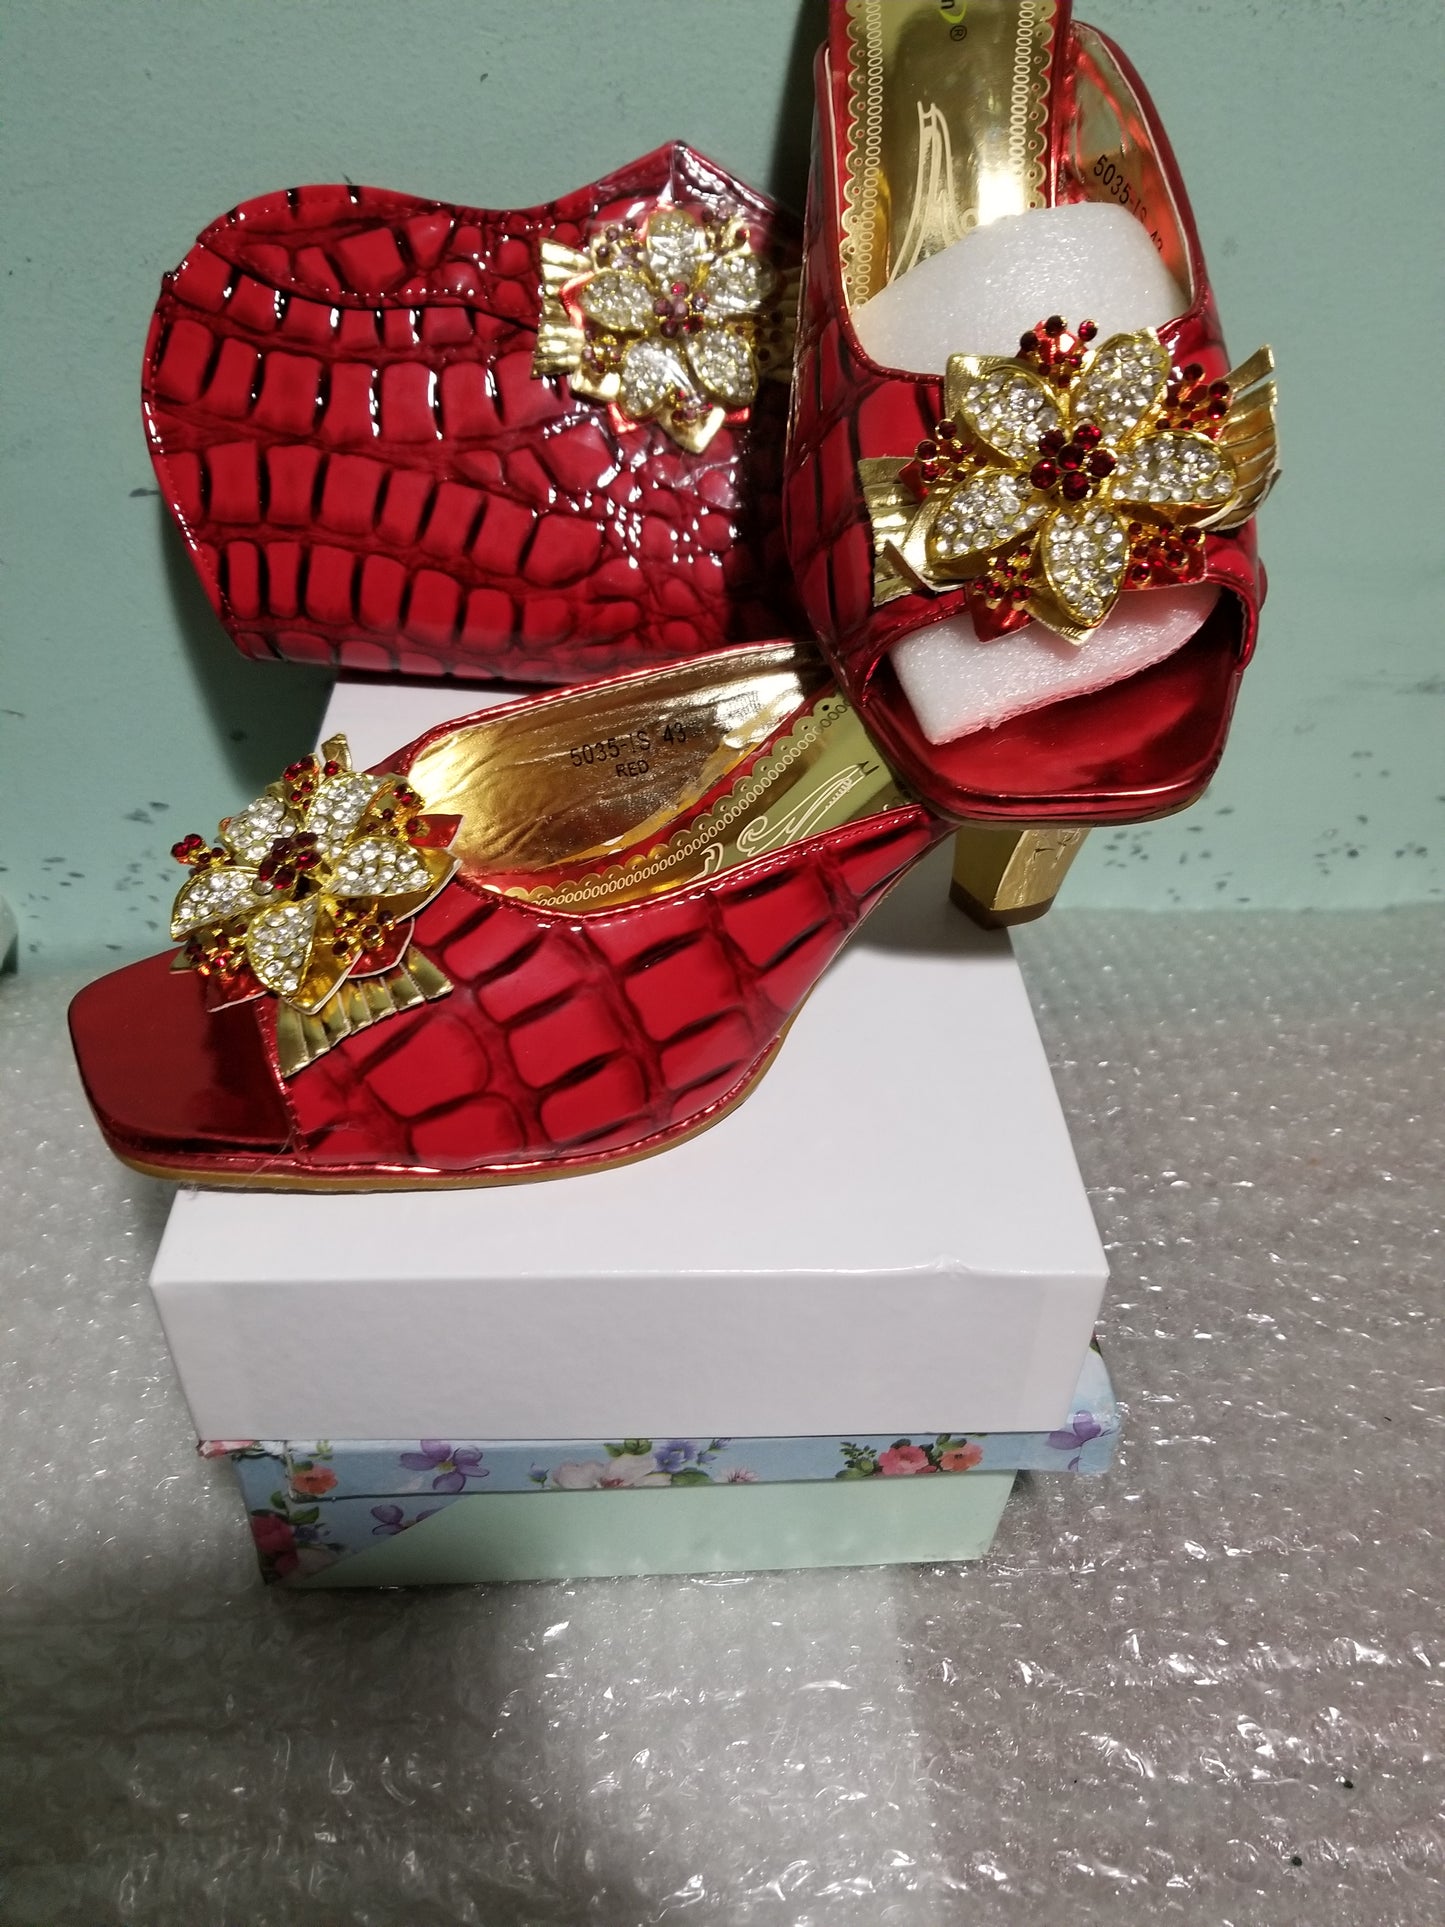 Sale: Size 39 Red Italian style matching slipper shoe and hand clutch. Quality made shoe and bag. 3" heel Sold as a set